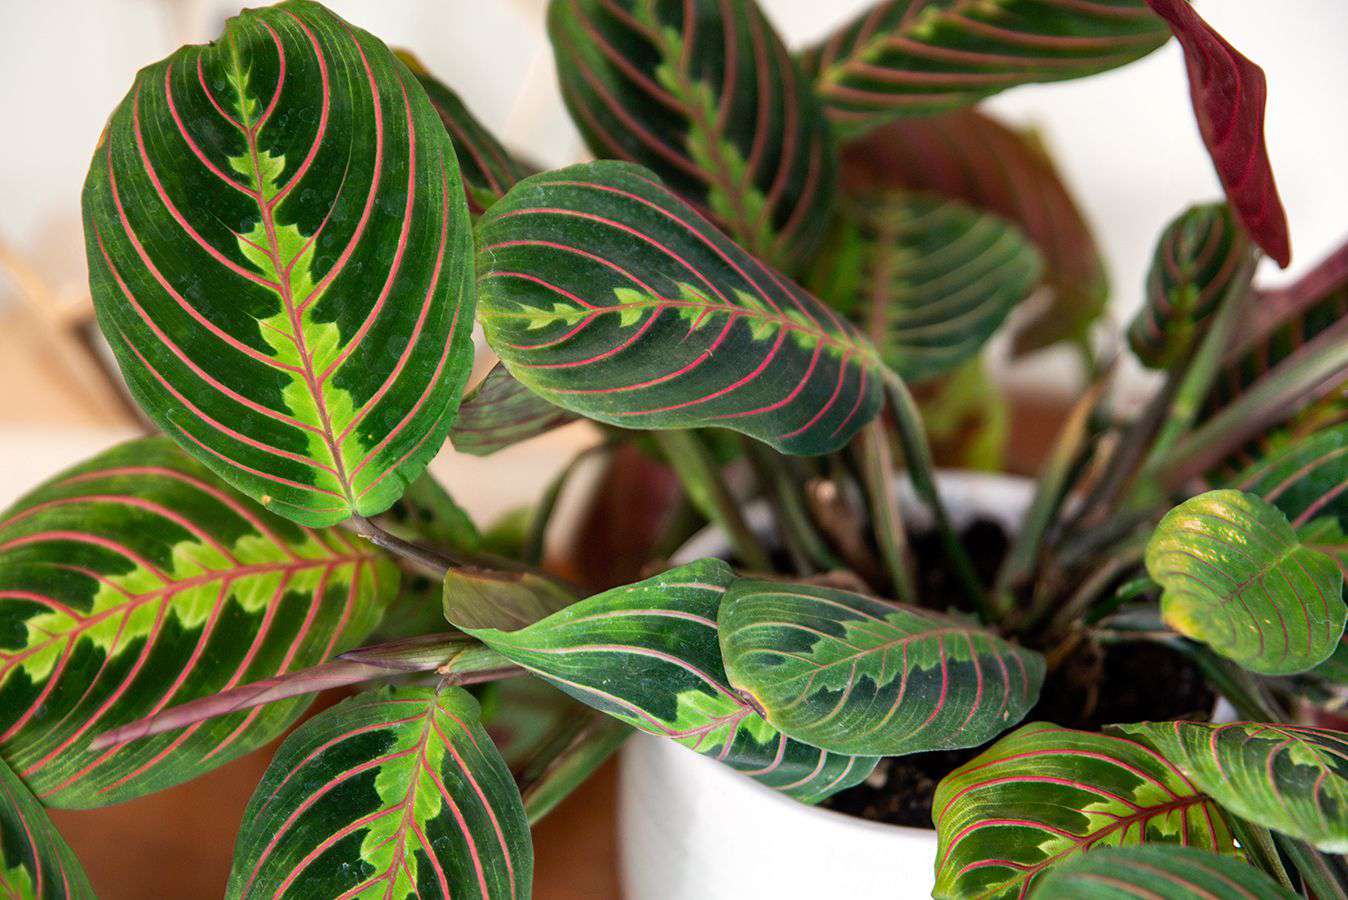 Prayer plant with deep green oval leaves with yellow splotches and pink stripes closeup